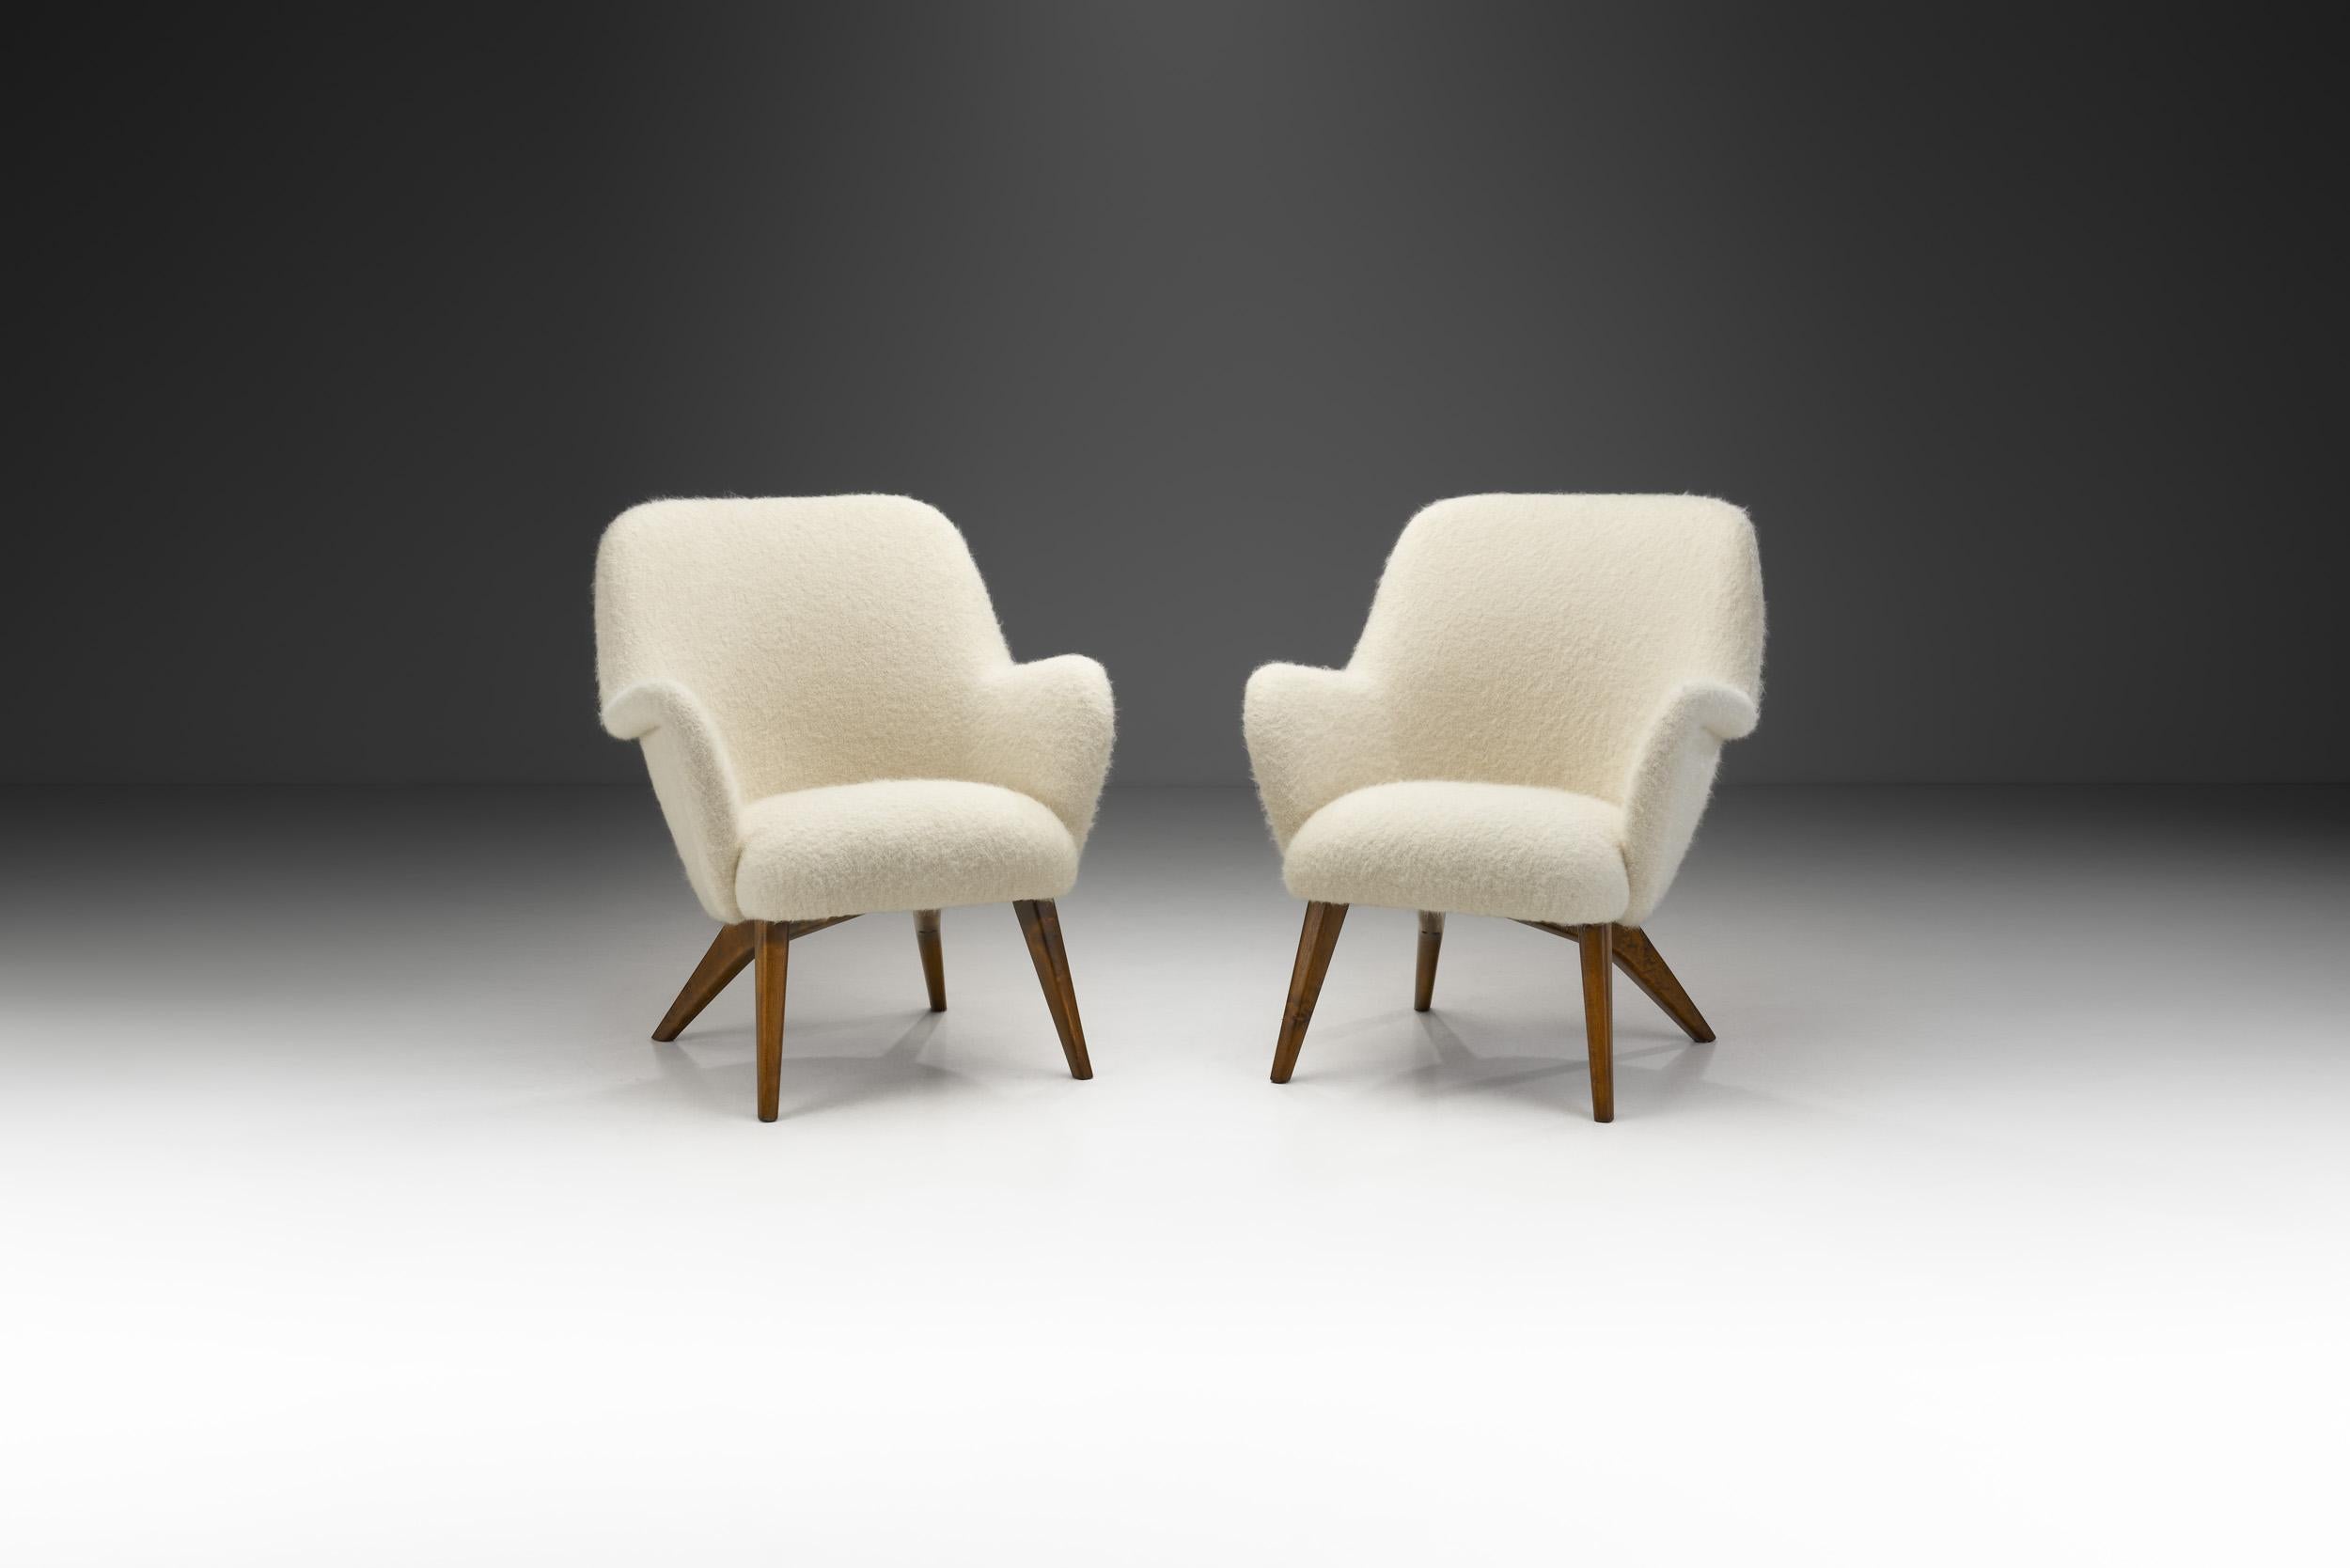 These “Pedro” armchairs show the homely curviness that defined the design of the 1950s. Hiort af Ornäs developed this model for his own furniture company, Puunveisto Oy.

The Pedro model has a soft, sculptural shape paired with an ergonomic